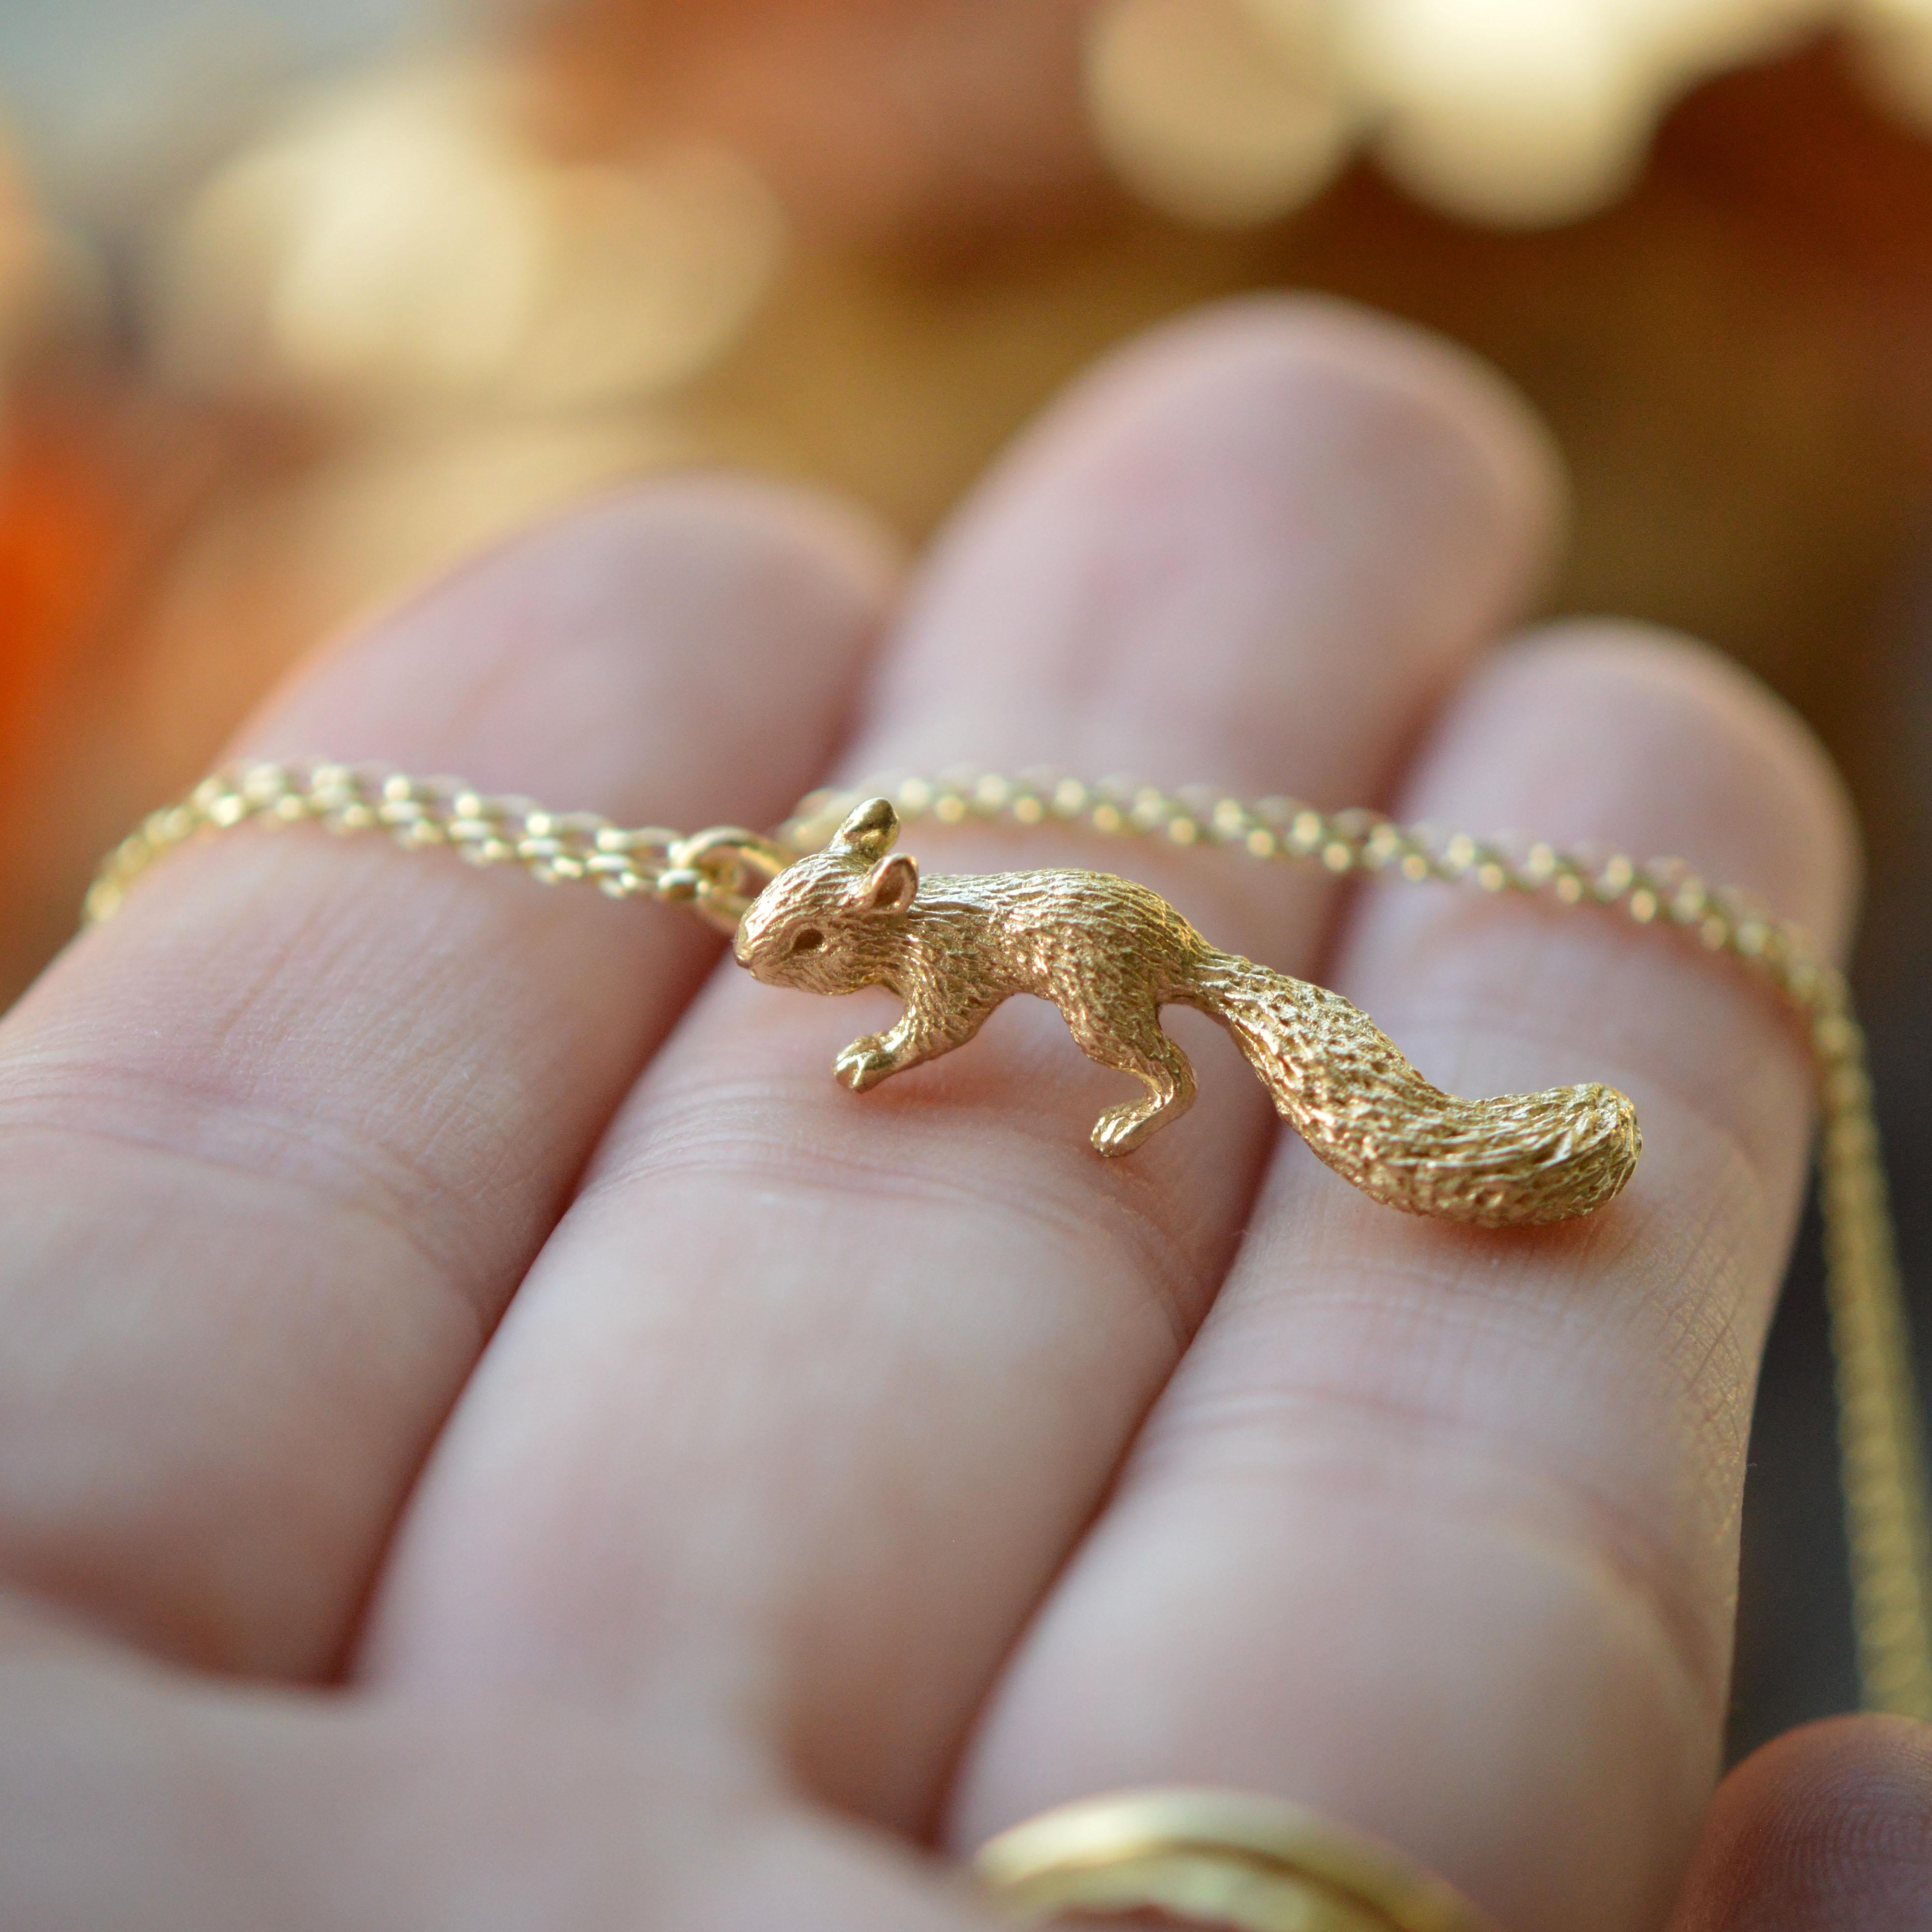 Solid 18 Carat Gold Baby Squirrel Pendant By Lucy Stopes-Roe For Sale 2